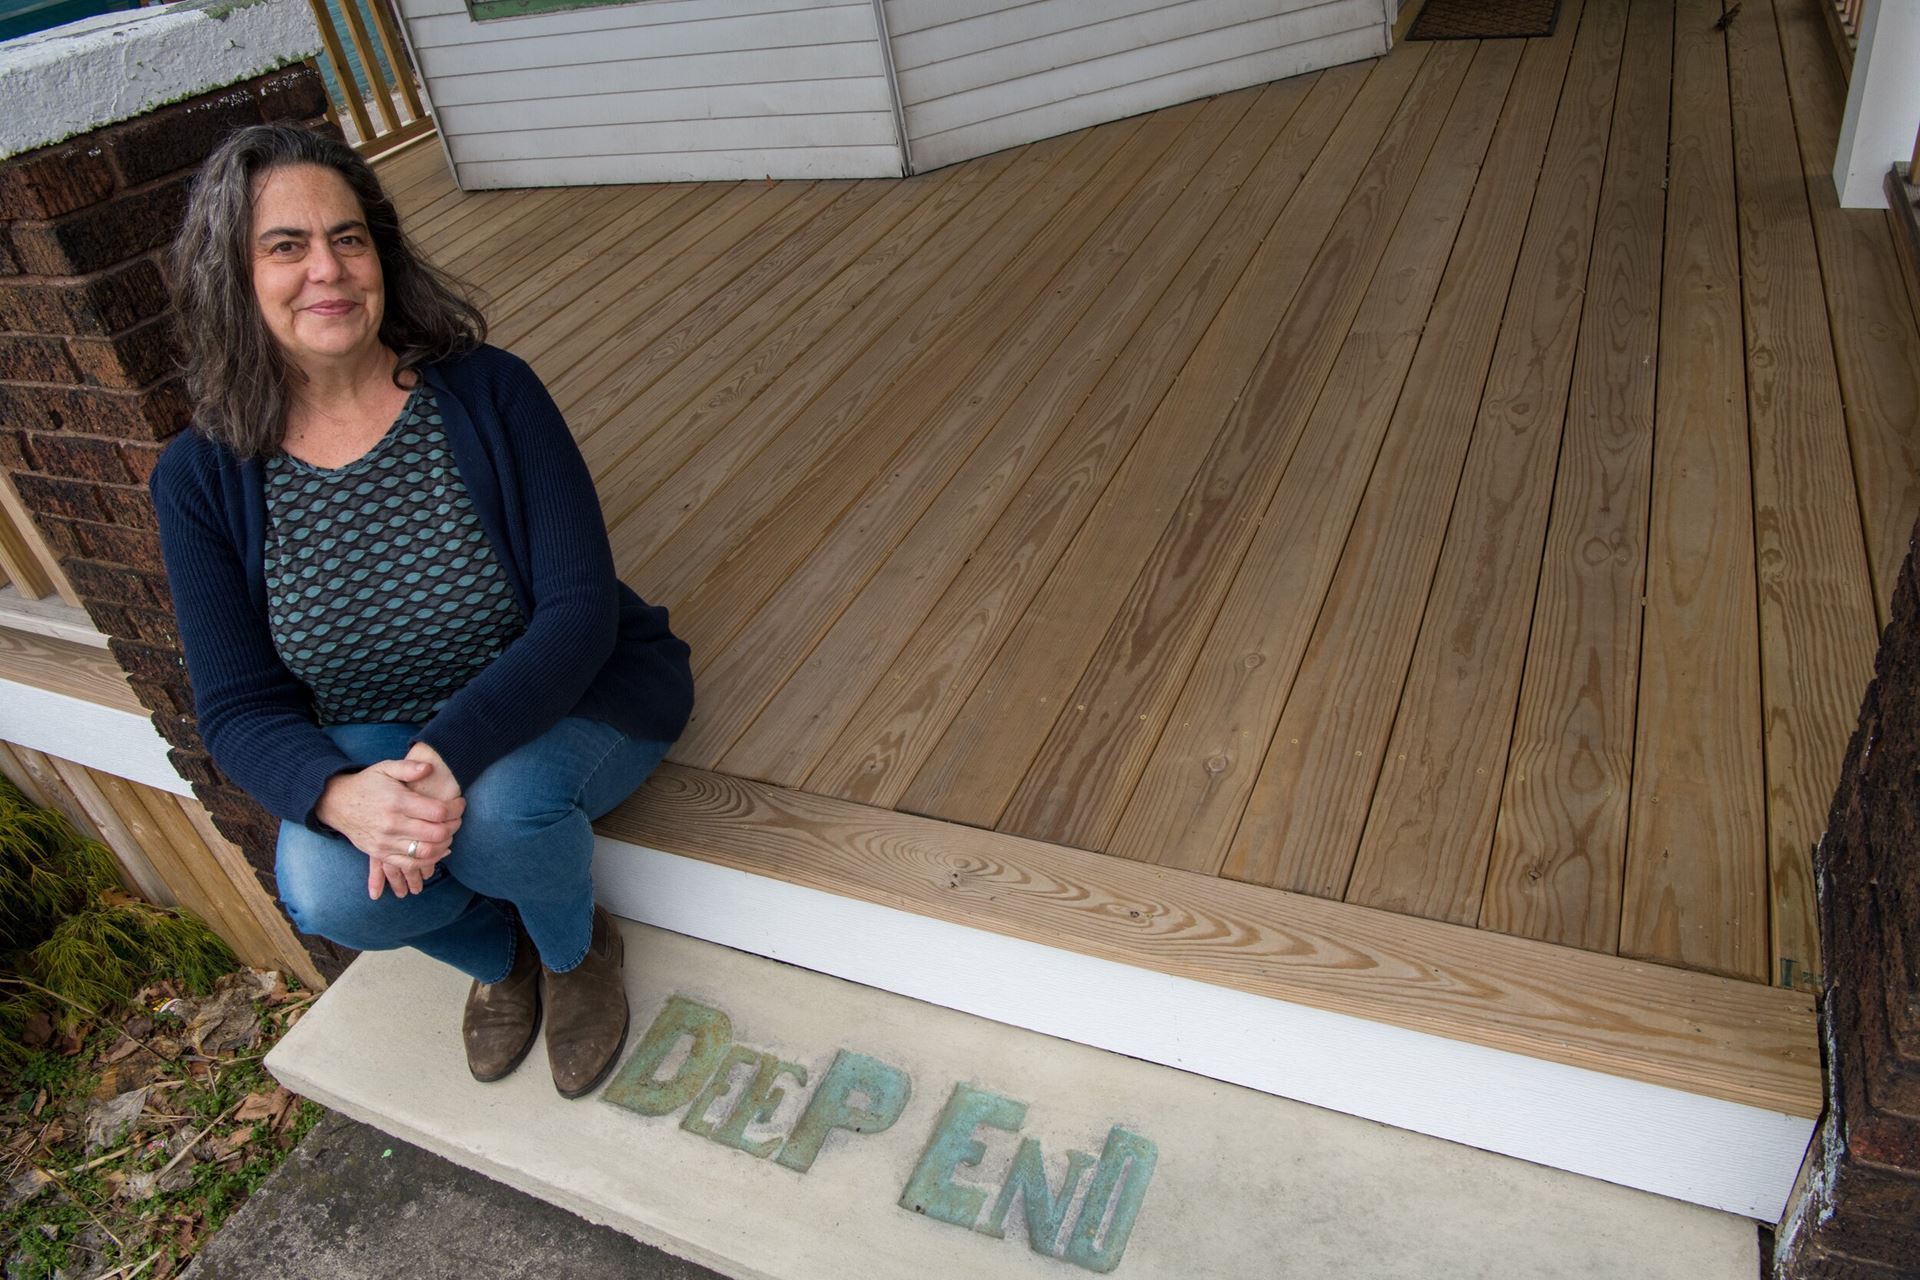 Portrait of Bellamy Printz sitting on a porch with the words "Deep End" at her feet.  She is wearing a green and blue shirt with a blue sweater and jeans. Her hair is dark and wavy.